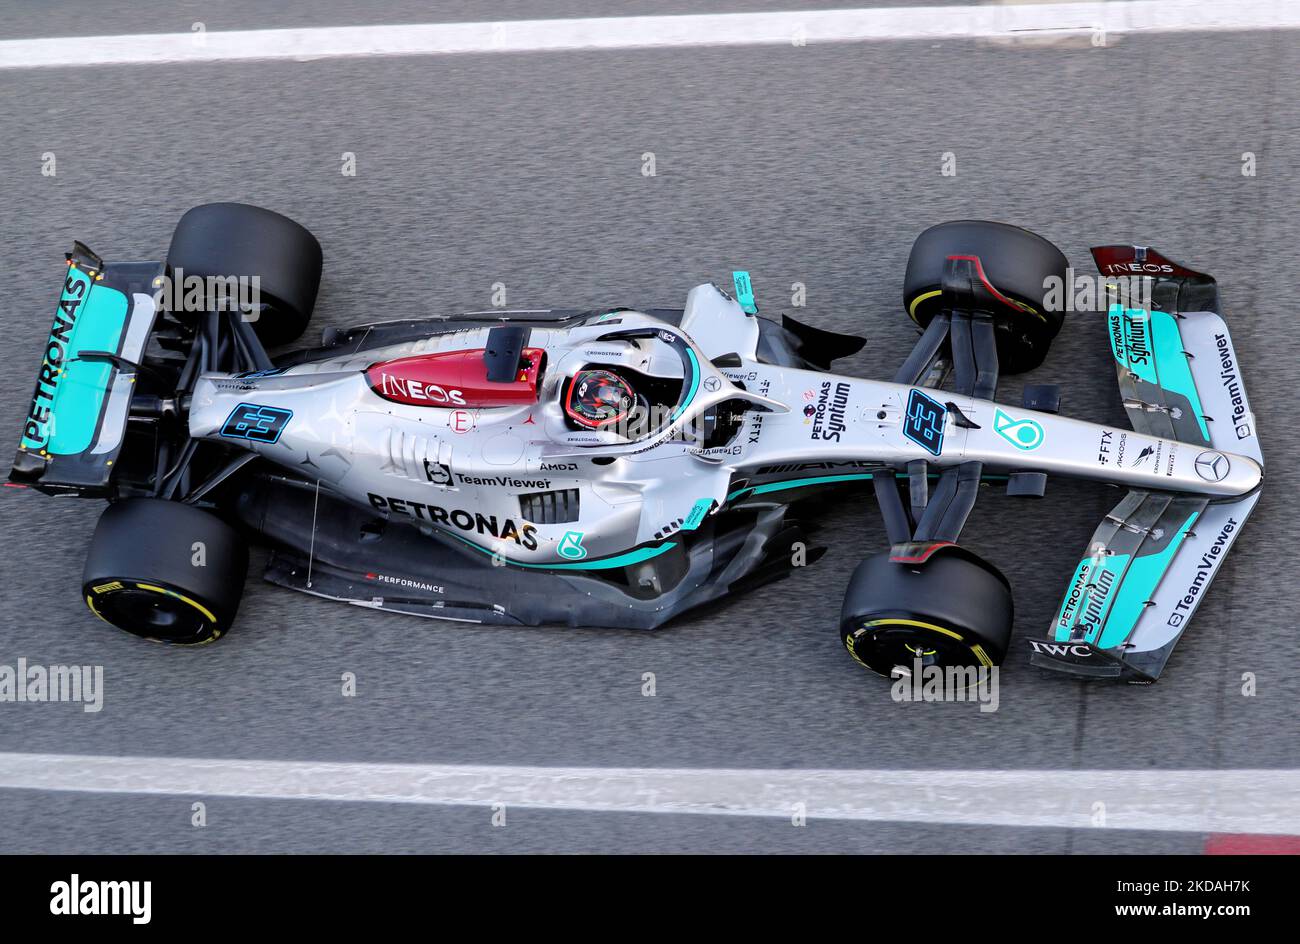 George Russell's Mercedes during practice 2 of the Formula 1 Pirelli GP of Spain, held at the Circuit de Barcelona Catalunya, in Barcelona, on 20th May 2022. -- (Photo by Urbanandsport/NurPhoto) Stock Photo